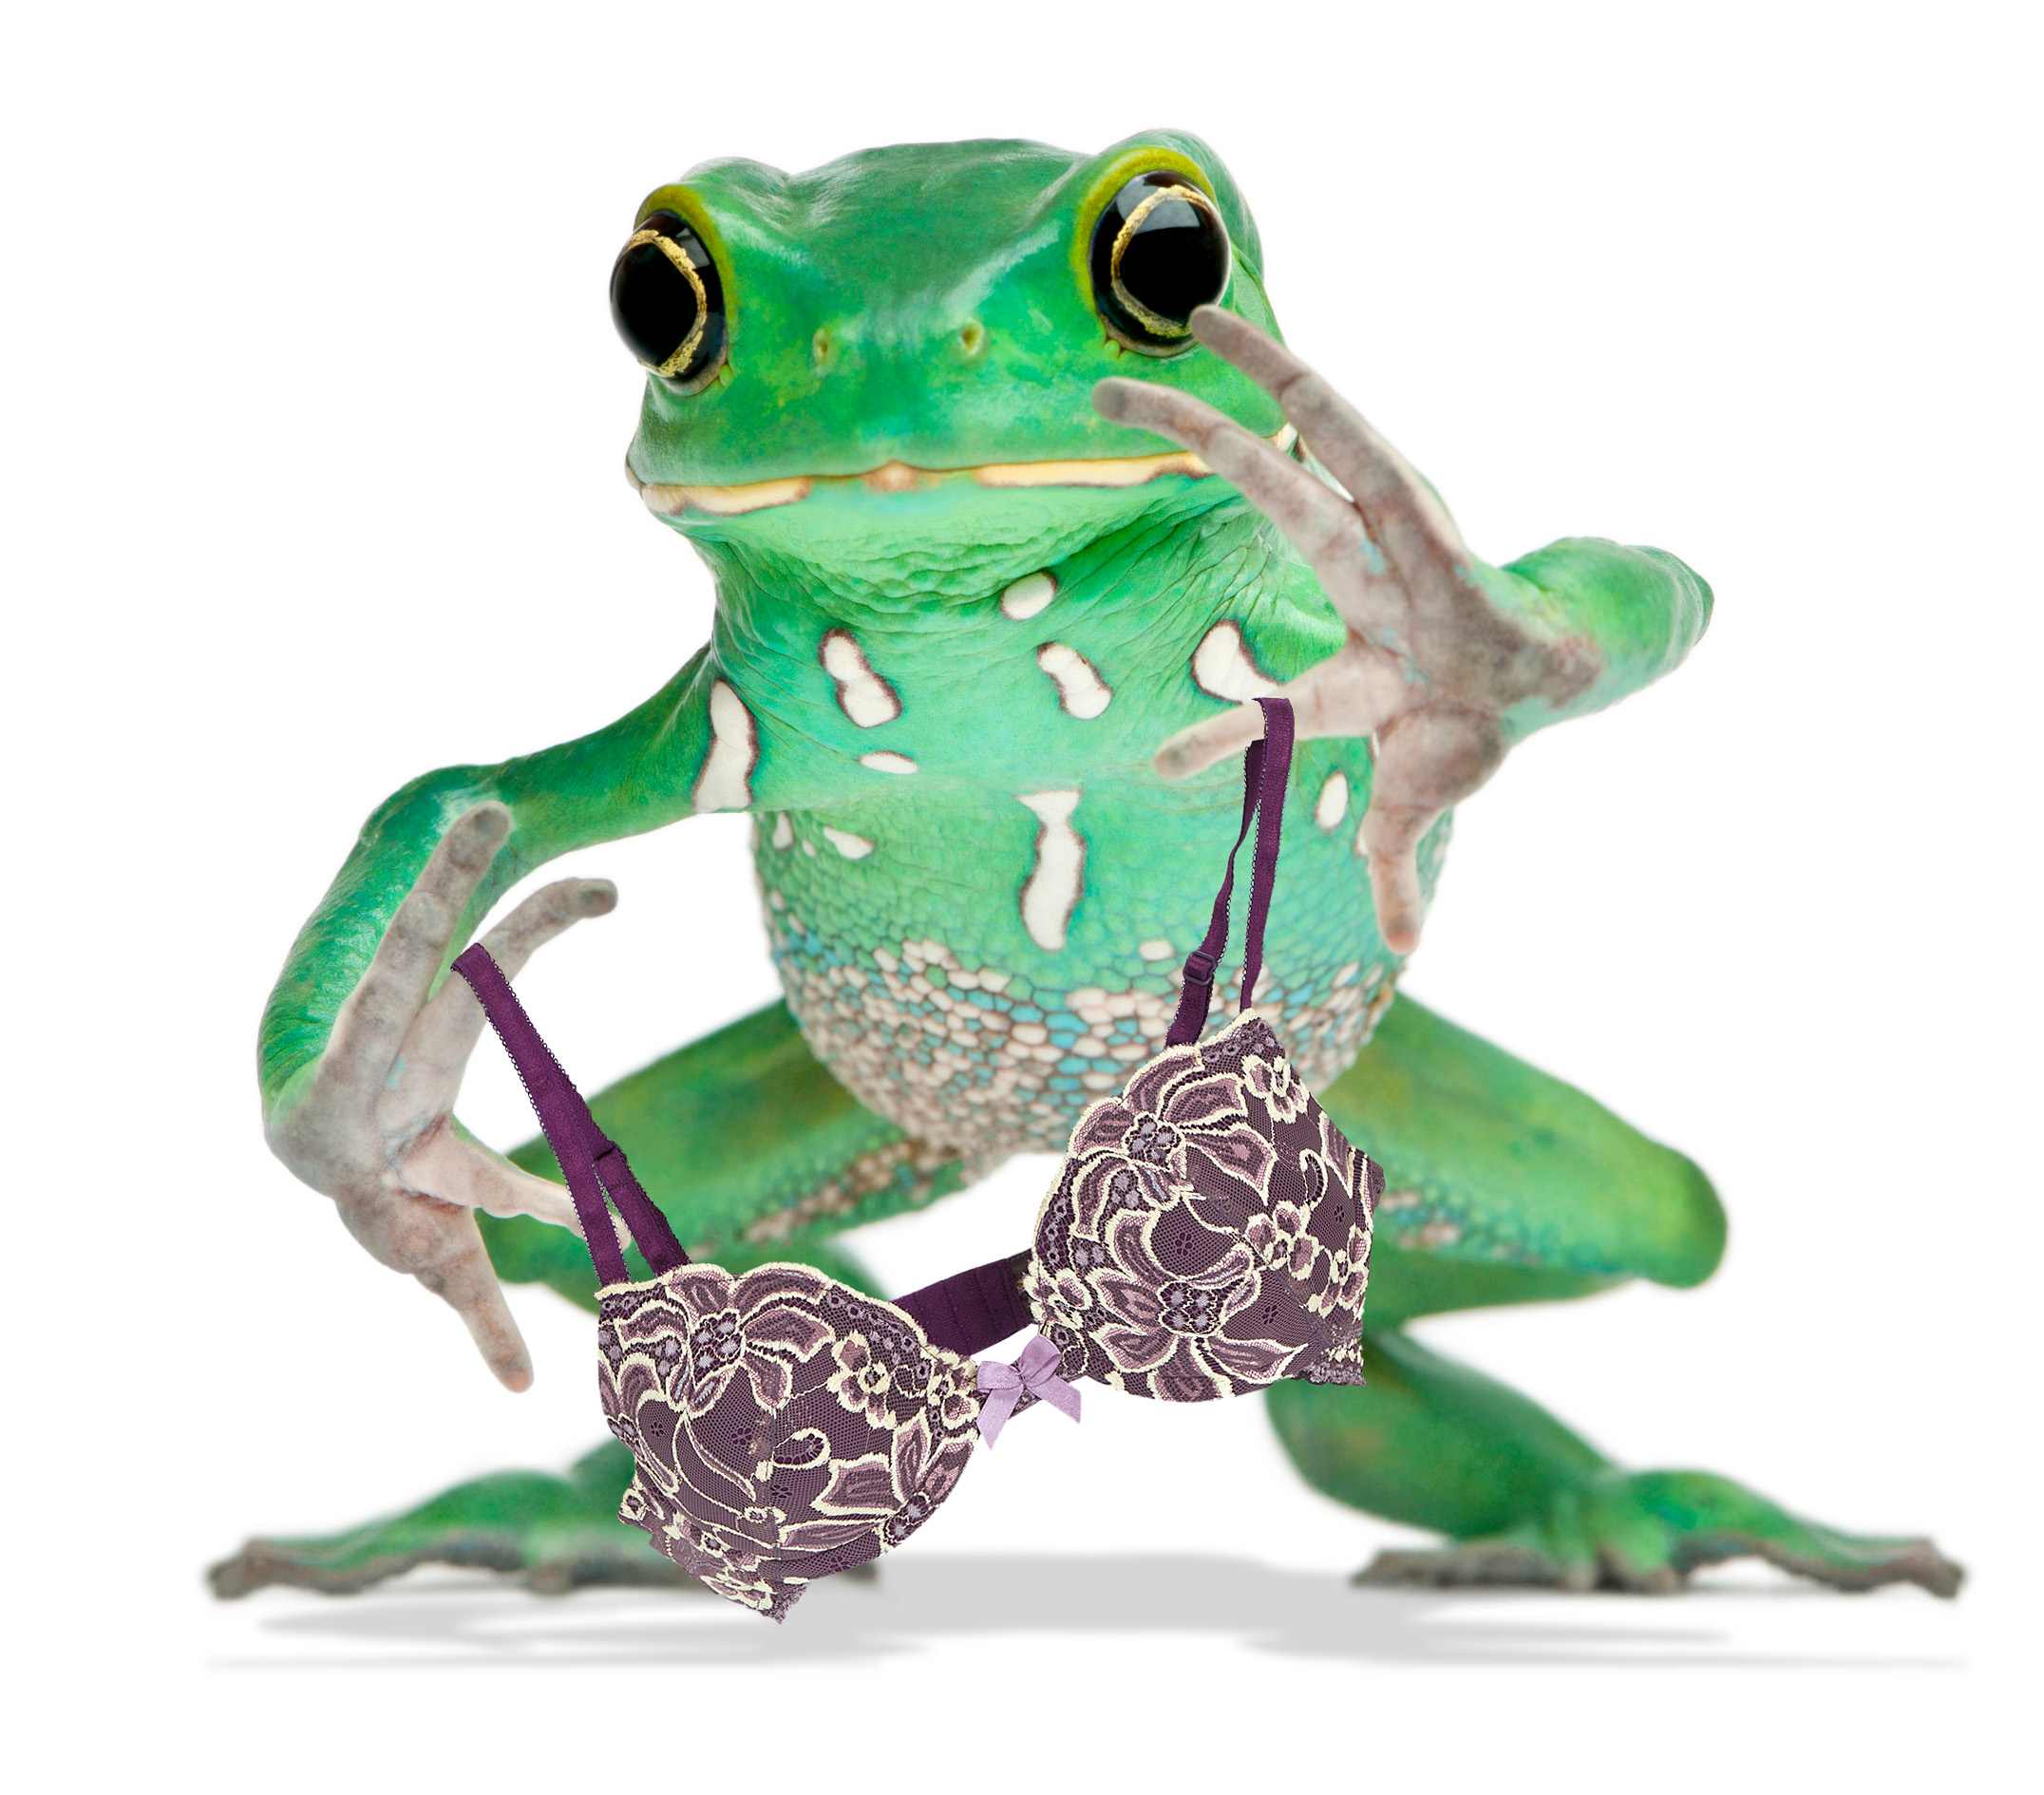 According to Karl Mayer, frogs are not the only creatures to be enchanted by the seductive bra shown here.